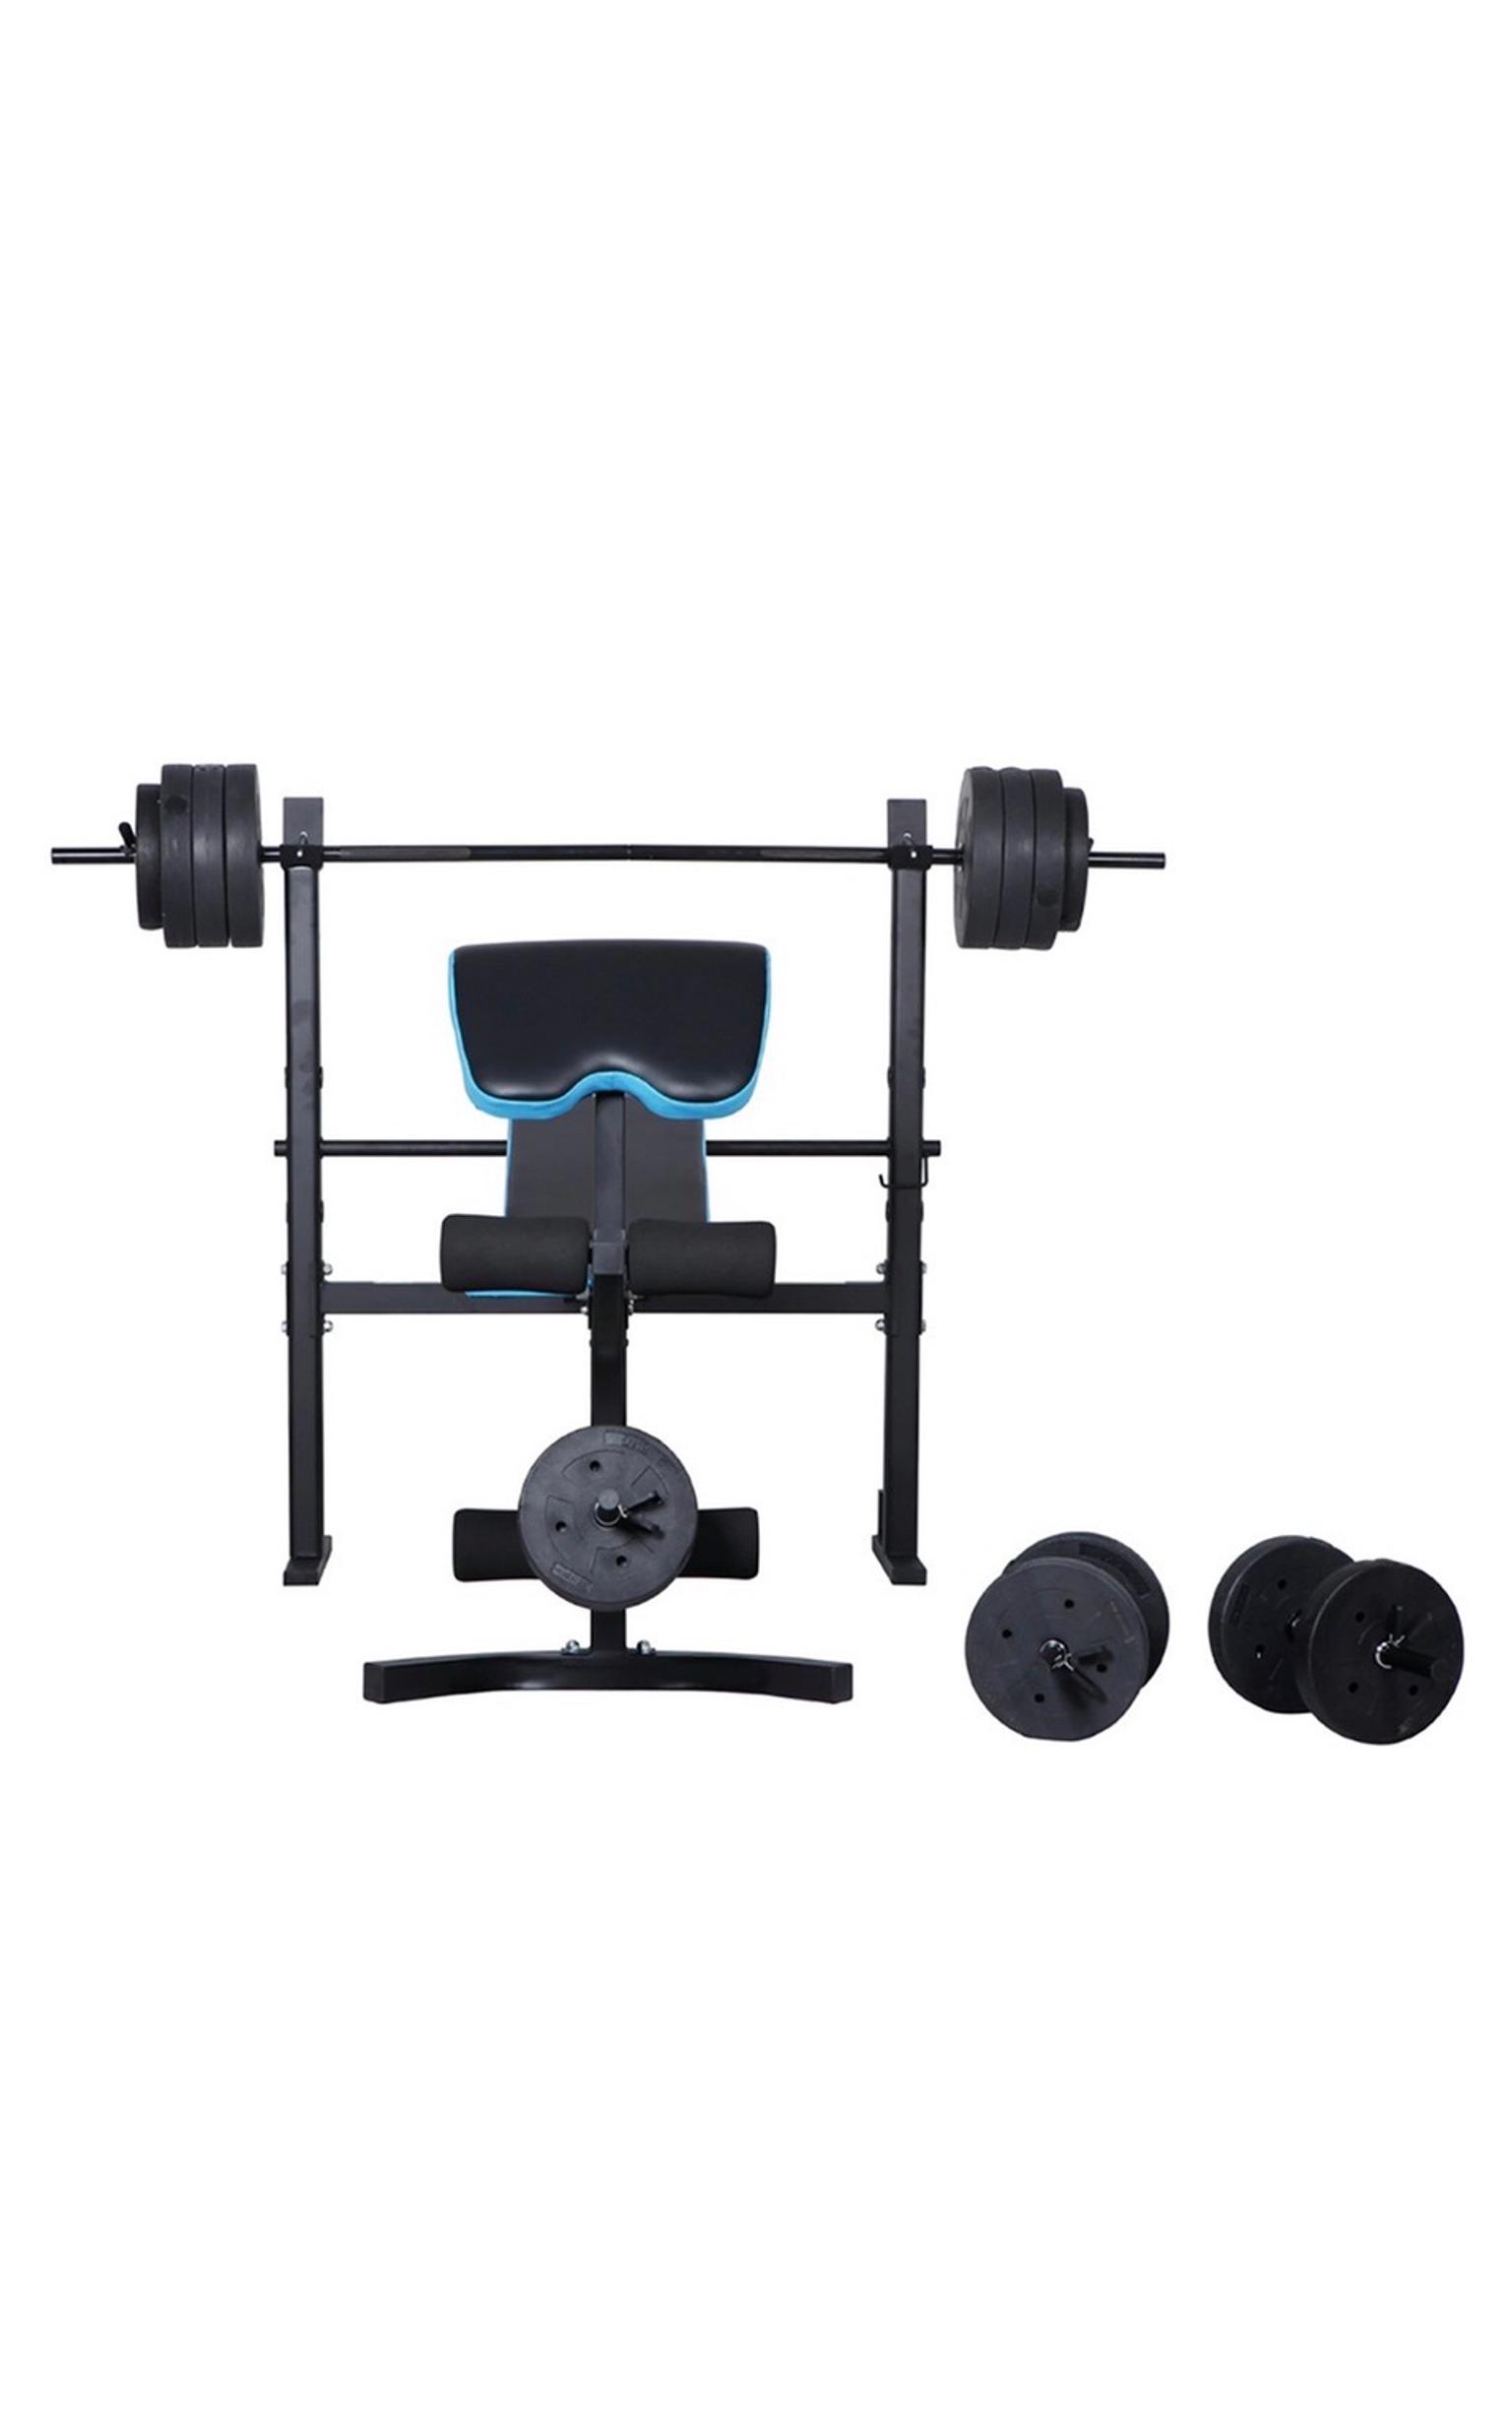 and 8 x 2.5kg vinyl weight plates 2 x 45cm dumbbell bars Pro Fitness Folding 50kg Weight Lifting Workout Bench Press 1 x 5ft bar includes a detachable preacher curl and leg curl station 6 x 5kg 